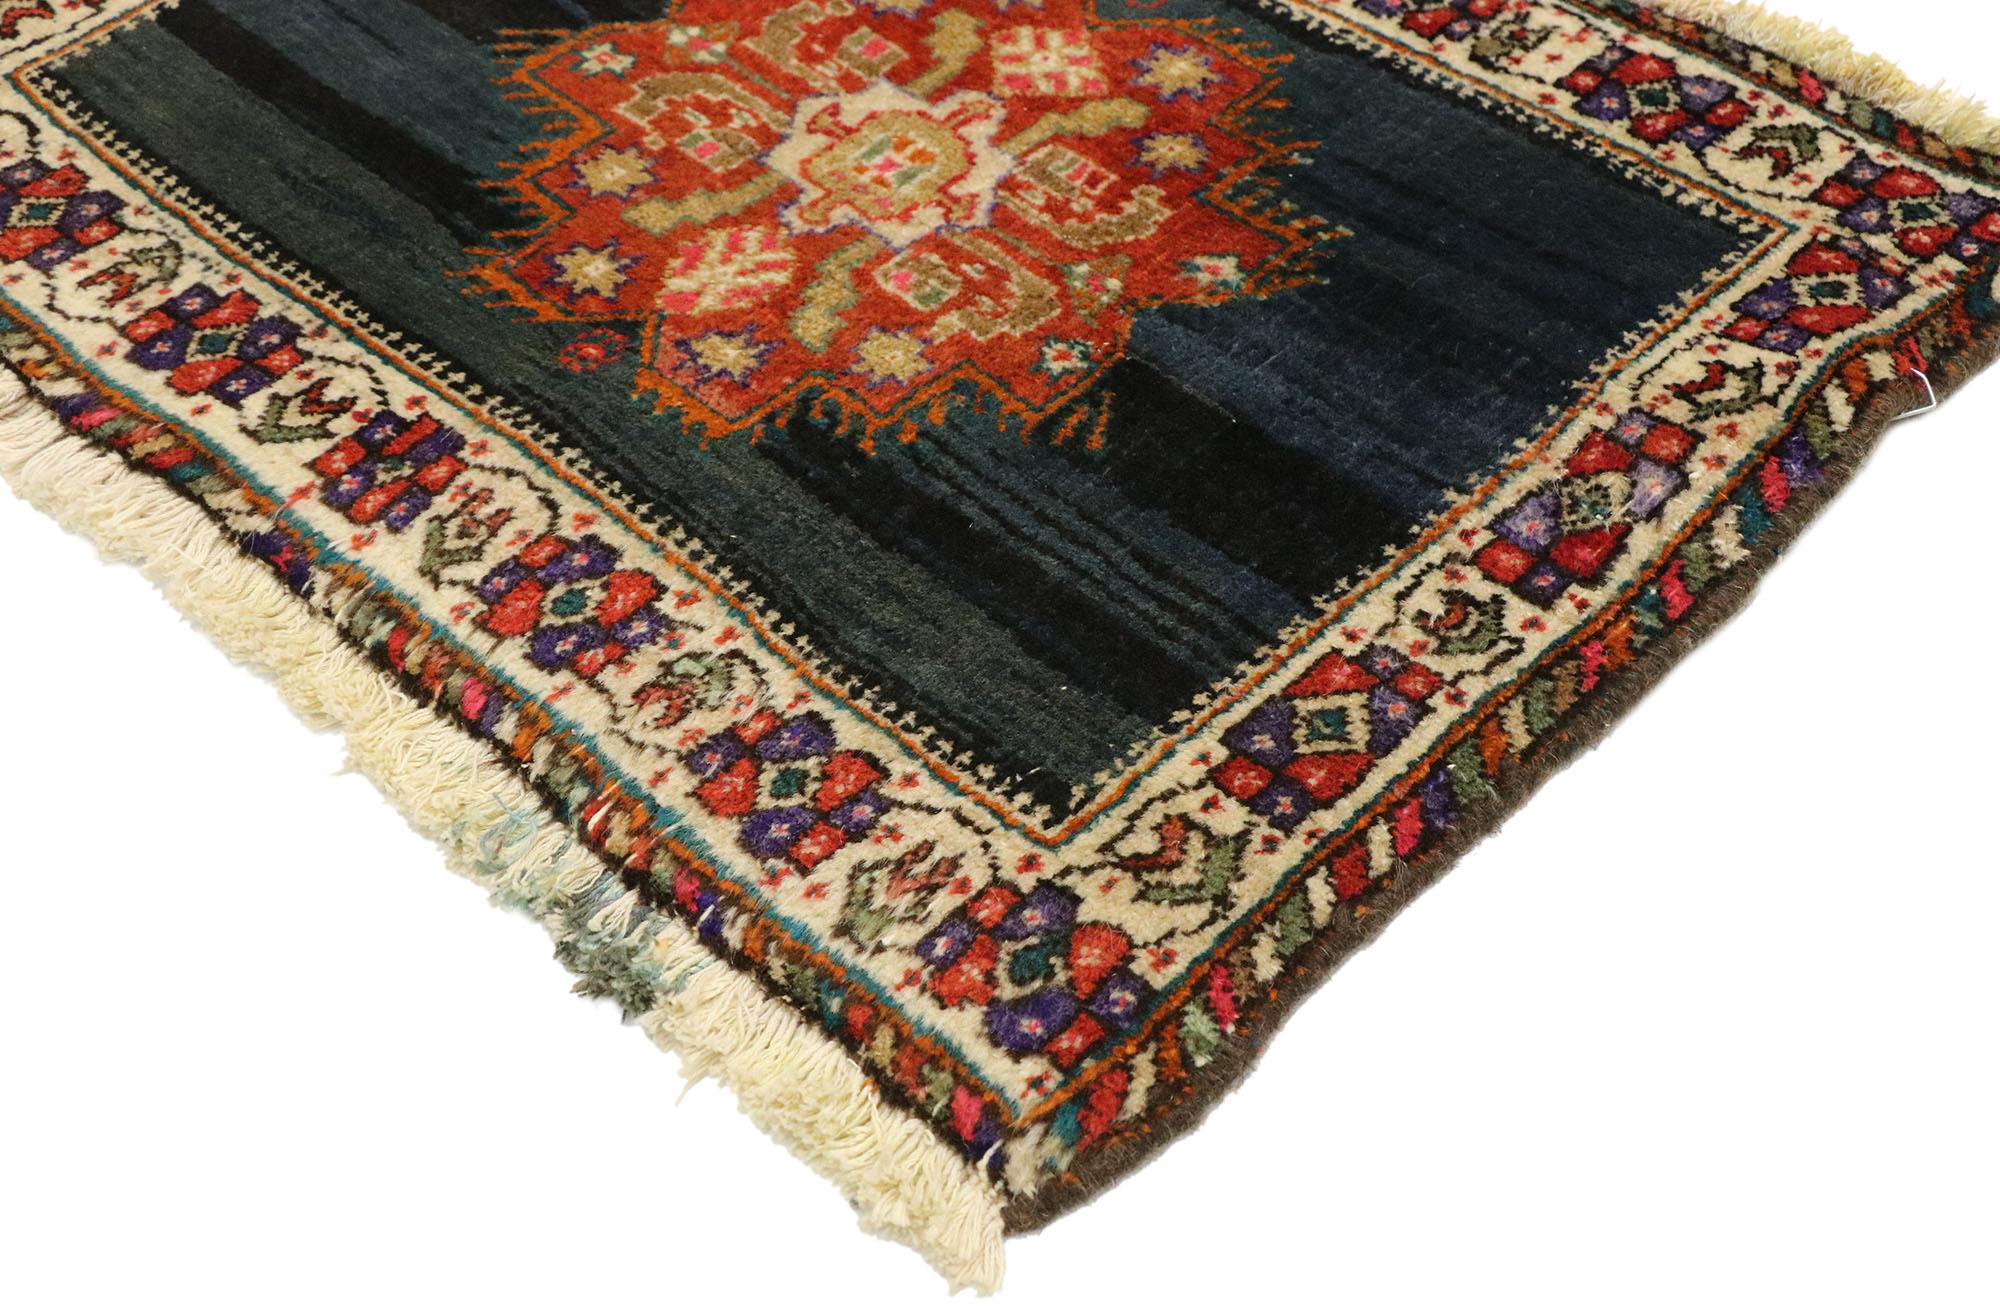 76204, vintage Persian Tabriz Scatter rug with Federal American Traditional style. Immersed in Persian history and refined colors, this hand knotted wool vintage Persian Tabriz scatter rug is poised to impress. The abrashed midnight navy blue field